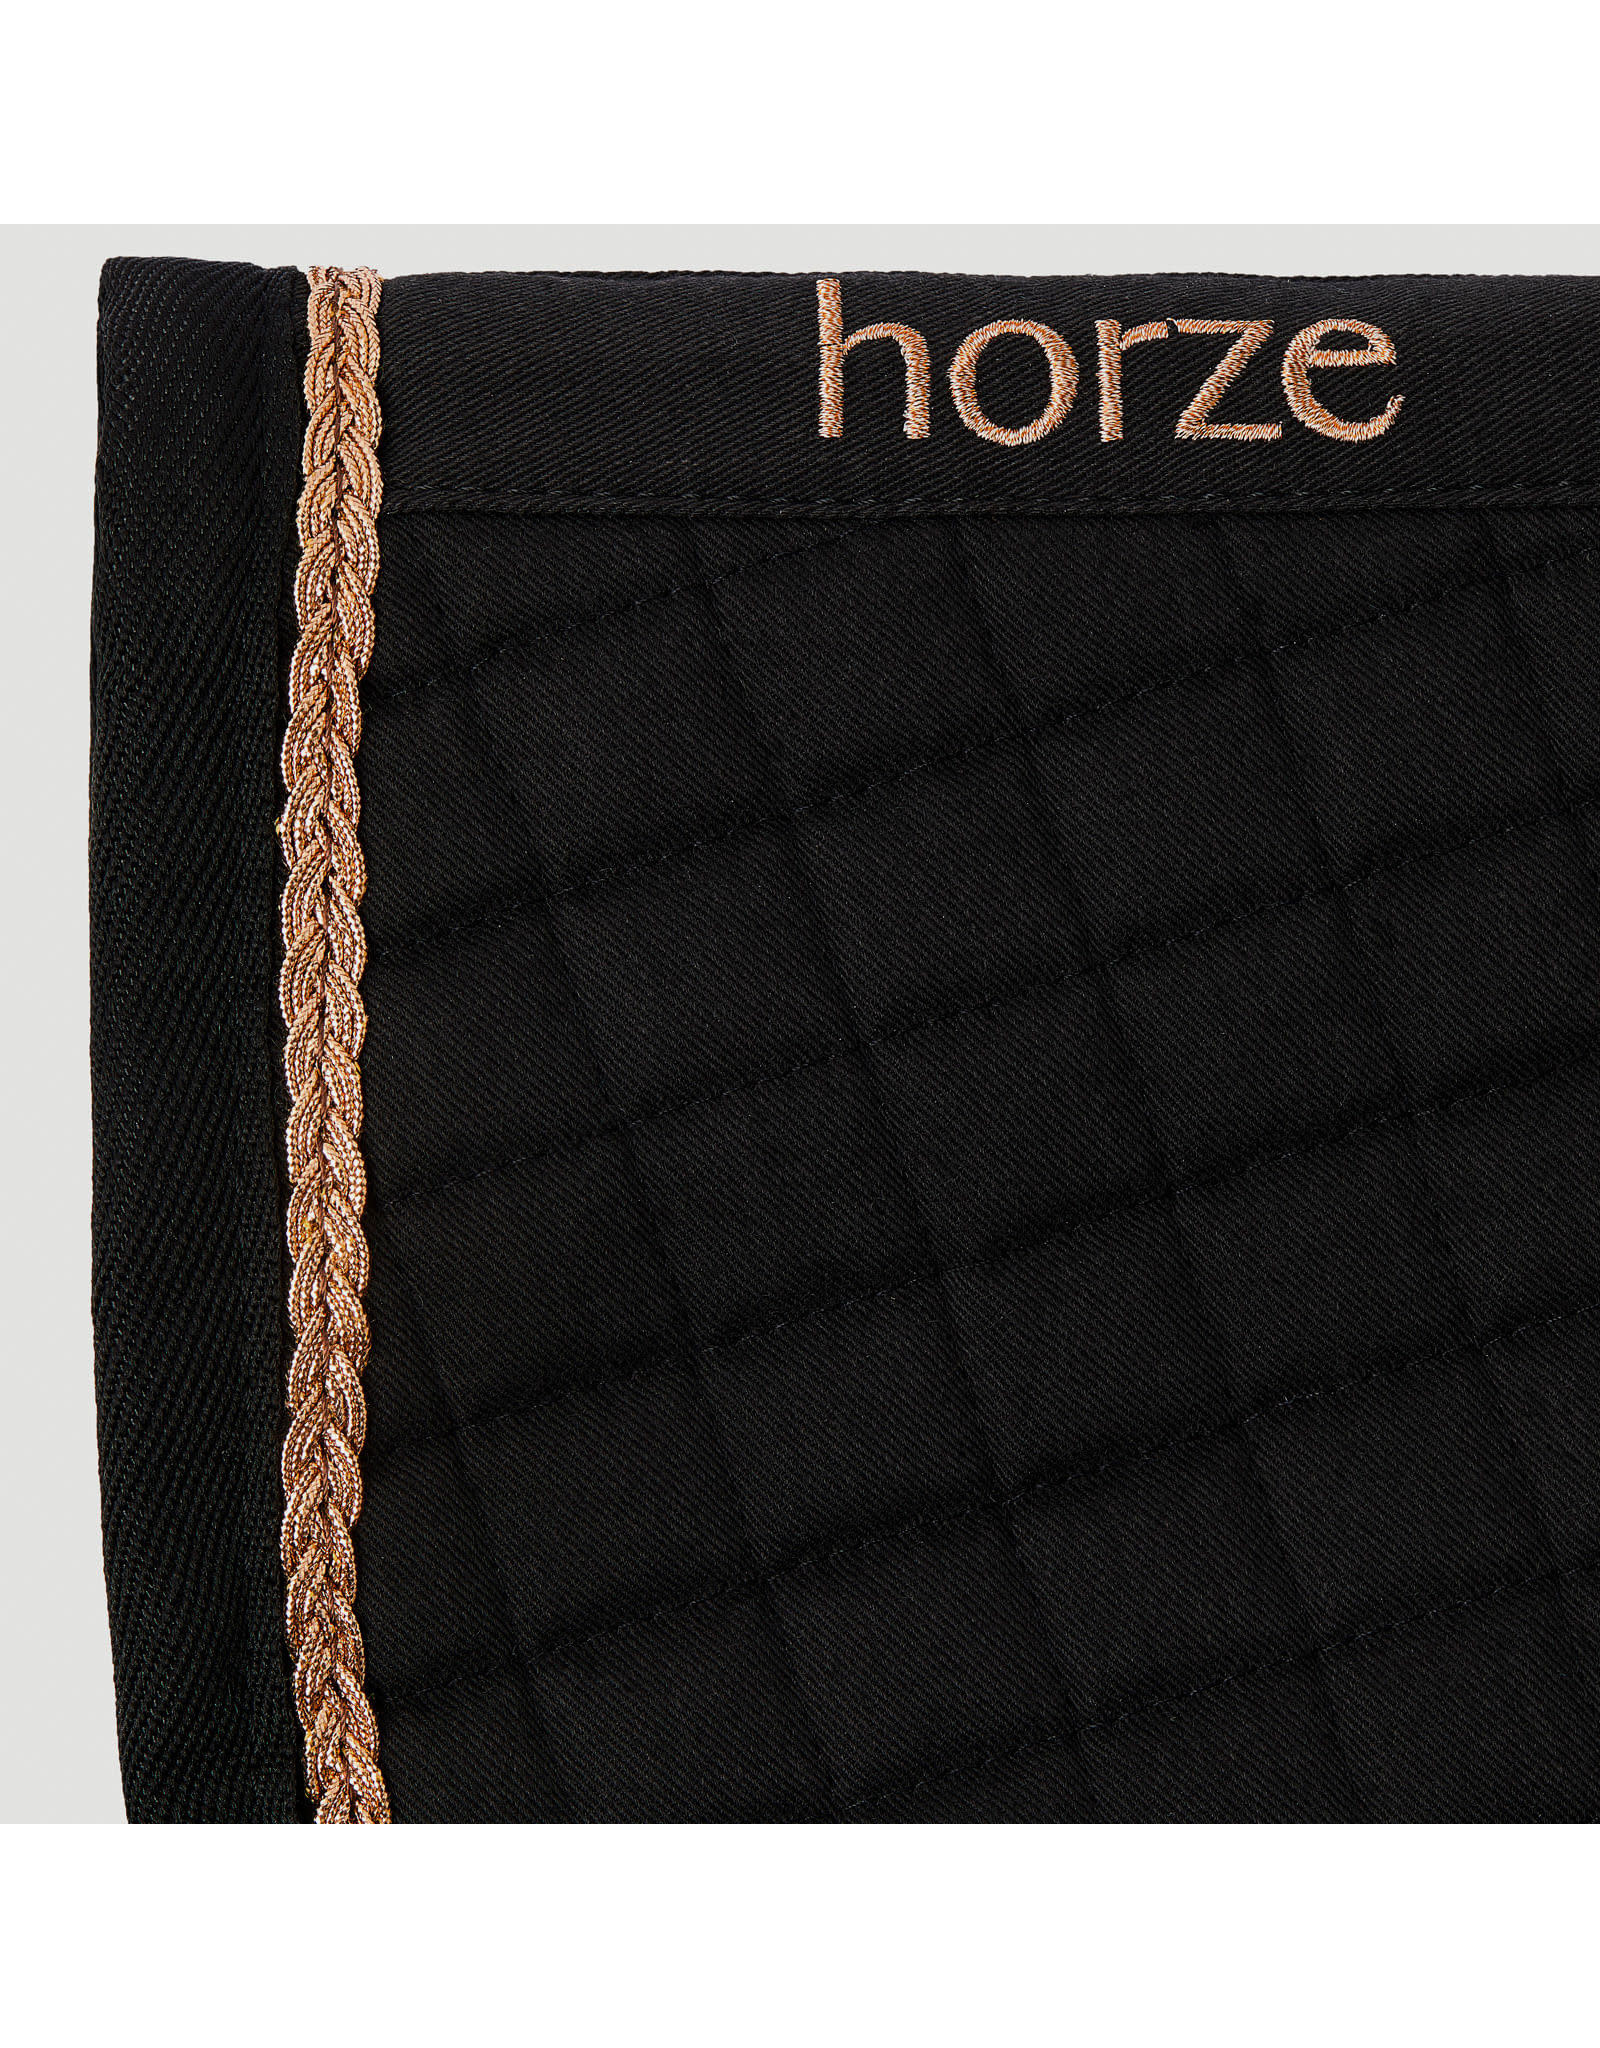 Horze Pad All Purpose Glarus with Silver Braided Trim